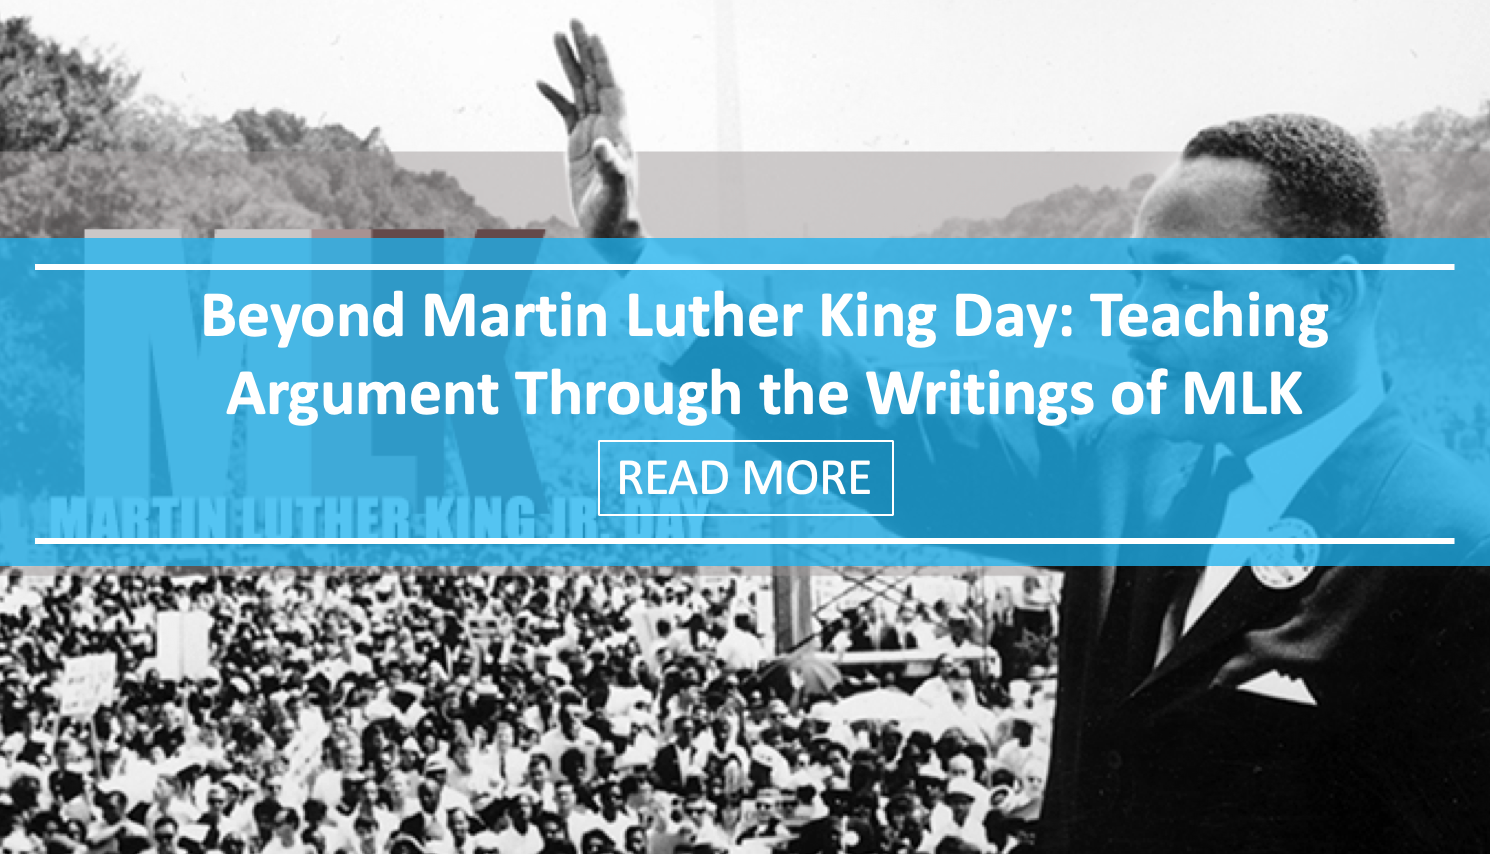 Beyond Martin Luther King Day: Teaching Argument Through the Writings of Martin Luther King